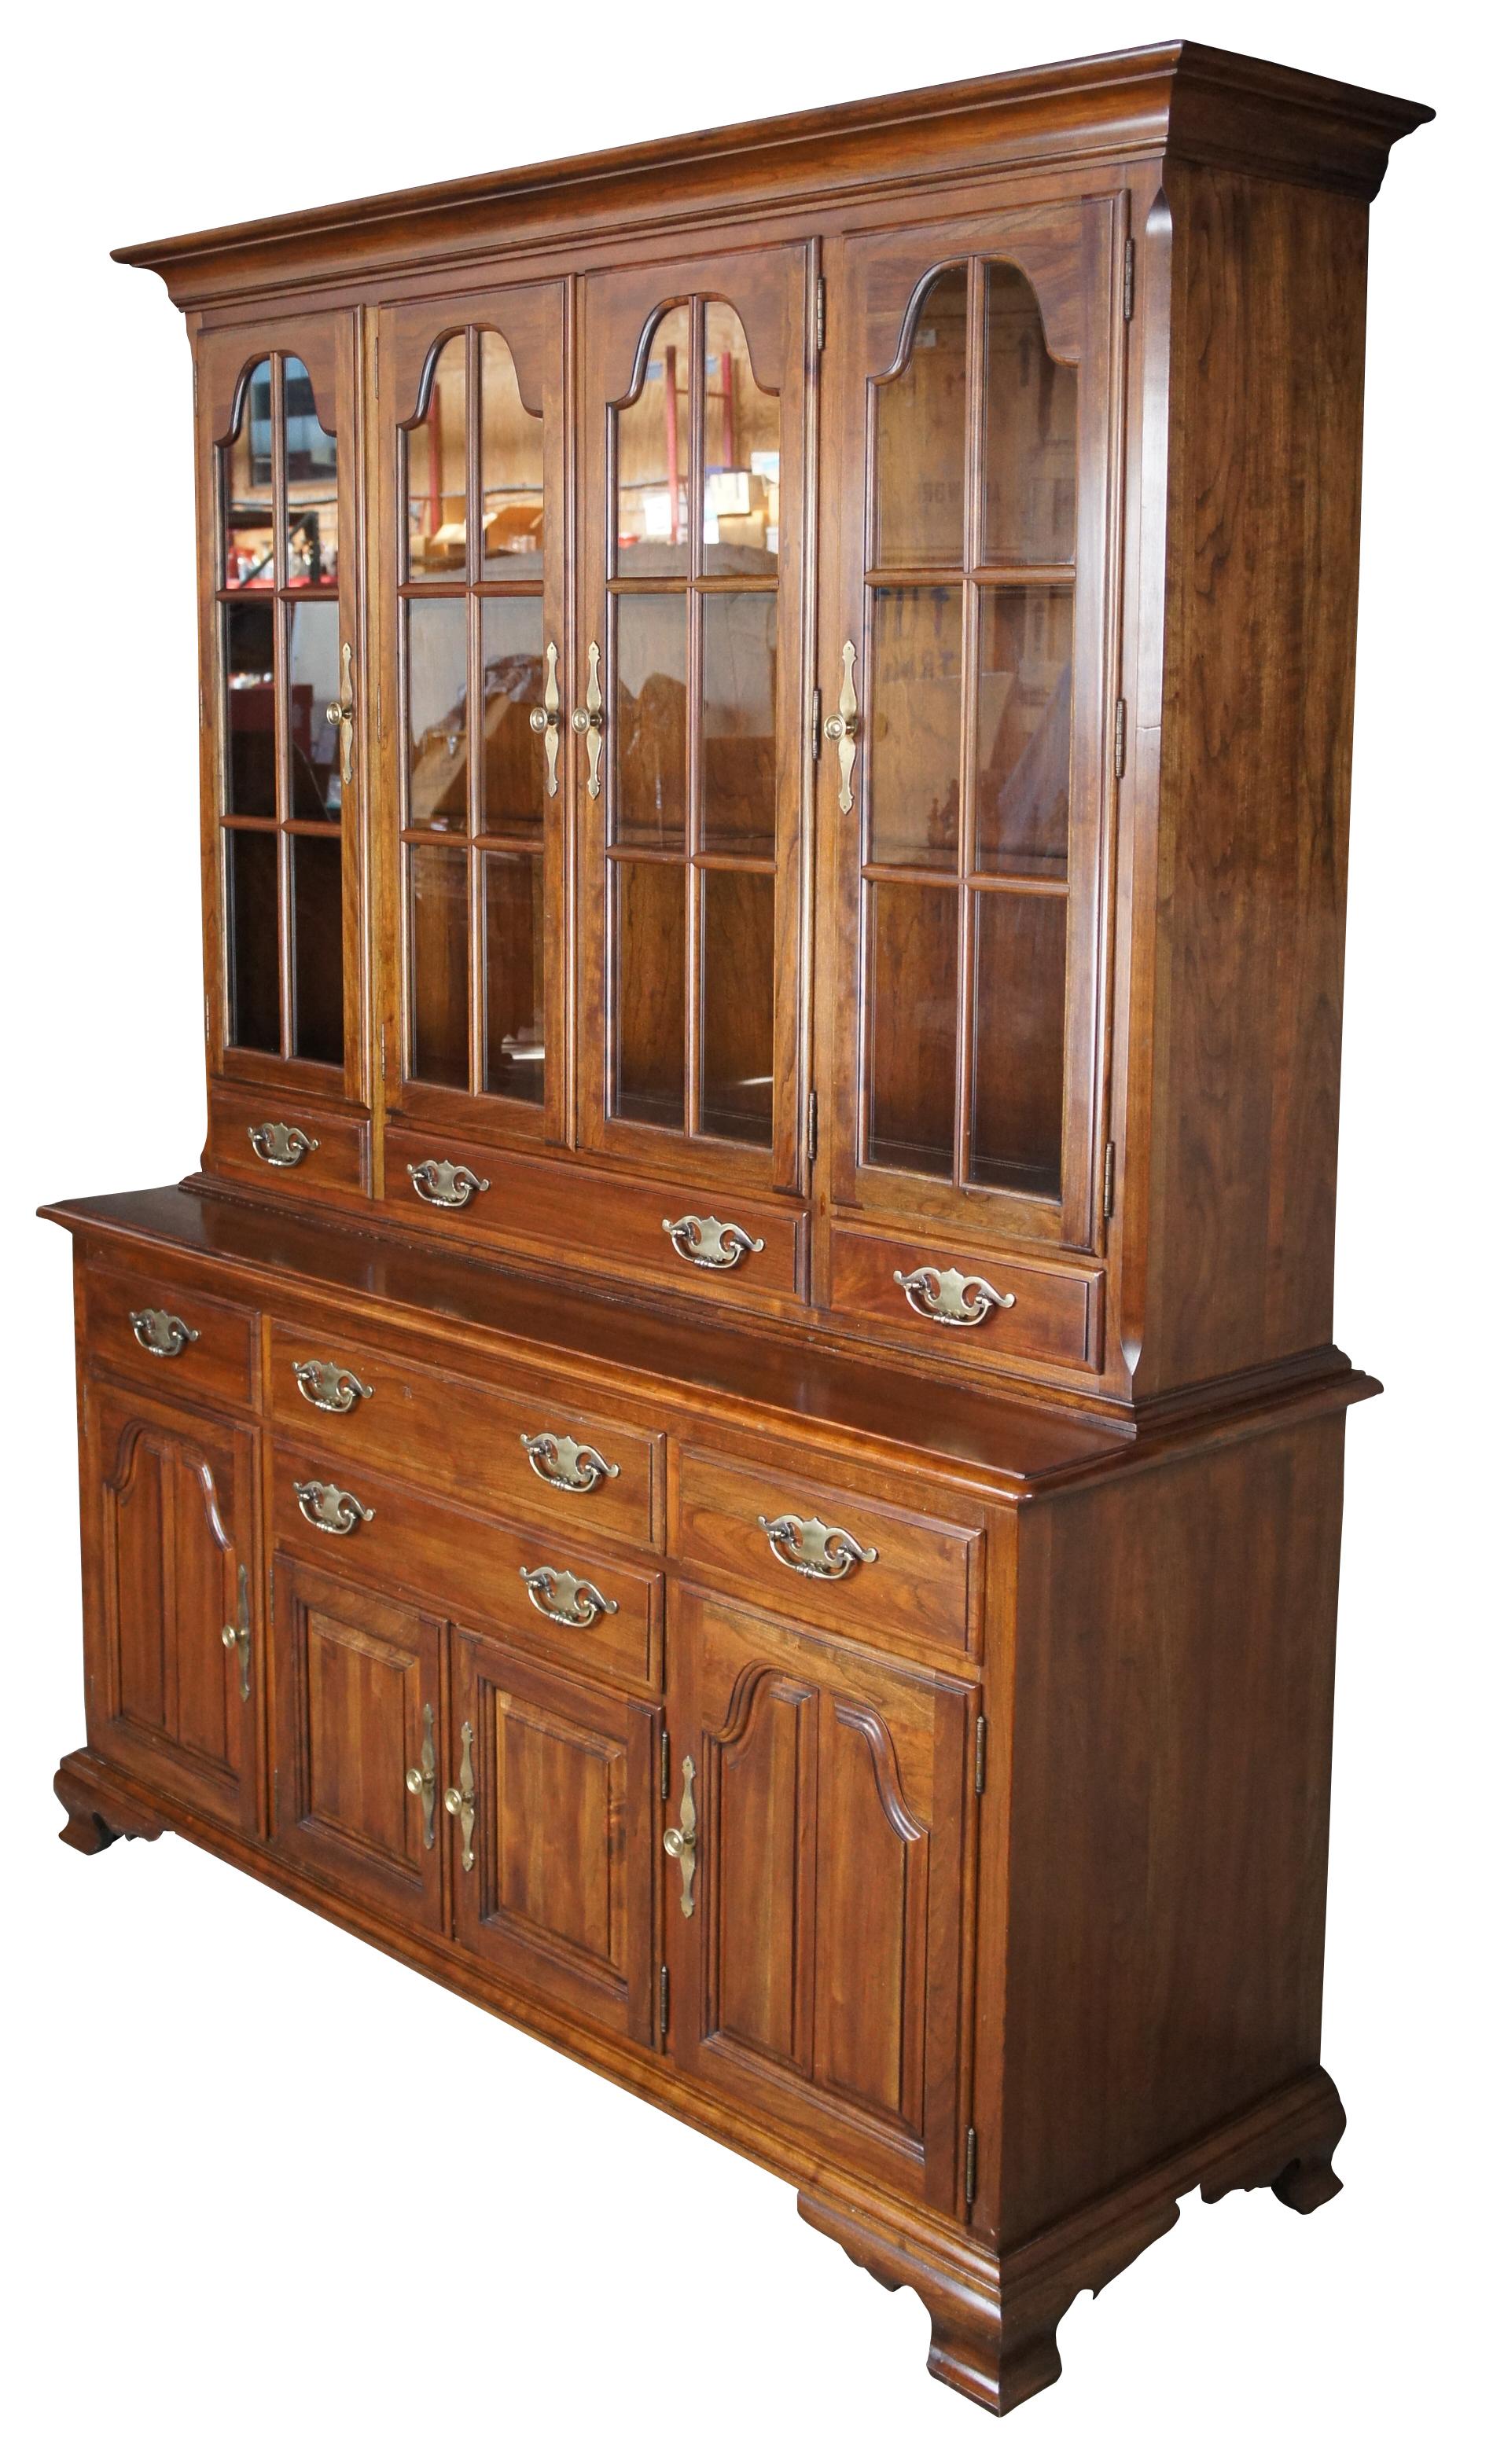 Circa 1970s Kling Colonial Solid Cherry China cabinet. Features a stepback hutch with arched and fretted glass doors over 3 quaint drawers. Opens to three shelves and glass inserts. Bottom buffet portion has four dovetailed drawers over three